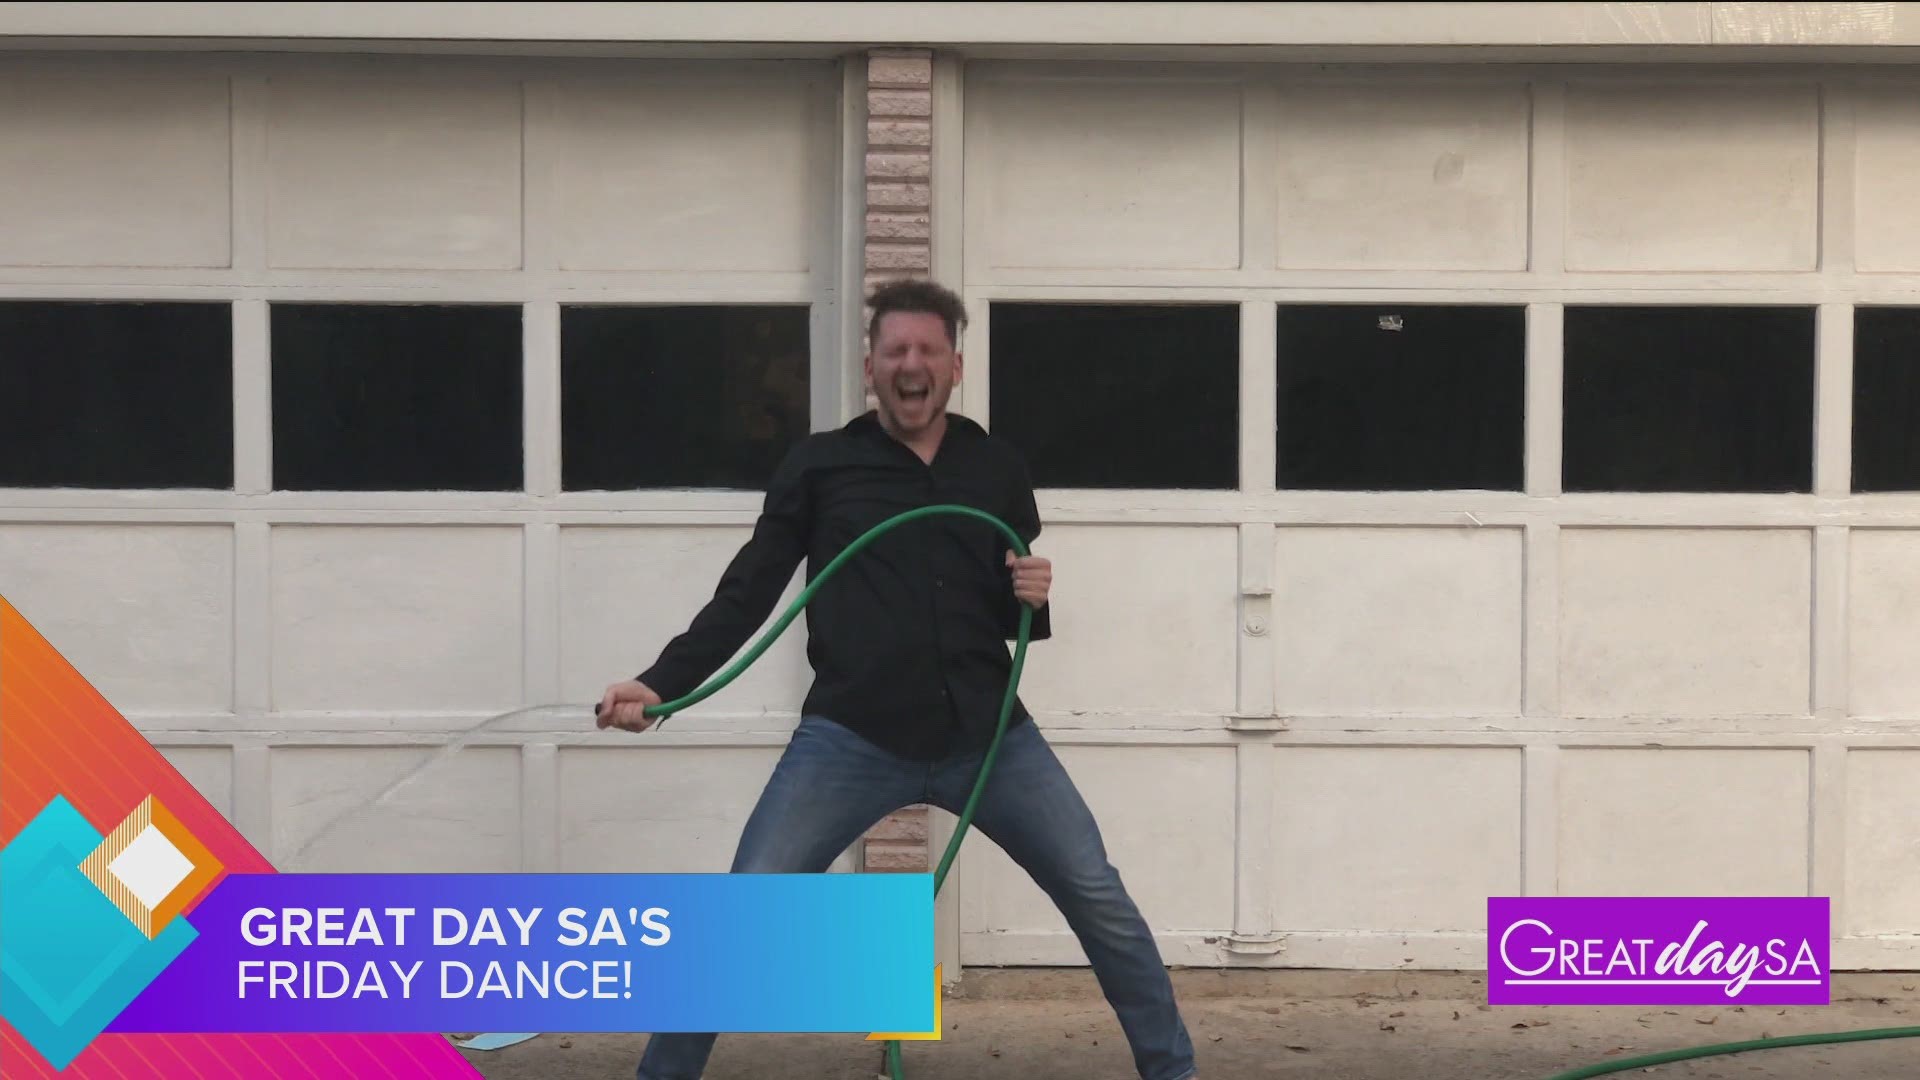 Before we get to the rest of the show, it's Friday, and it's time to DANCE!